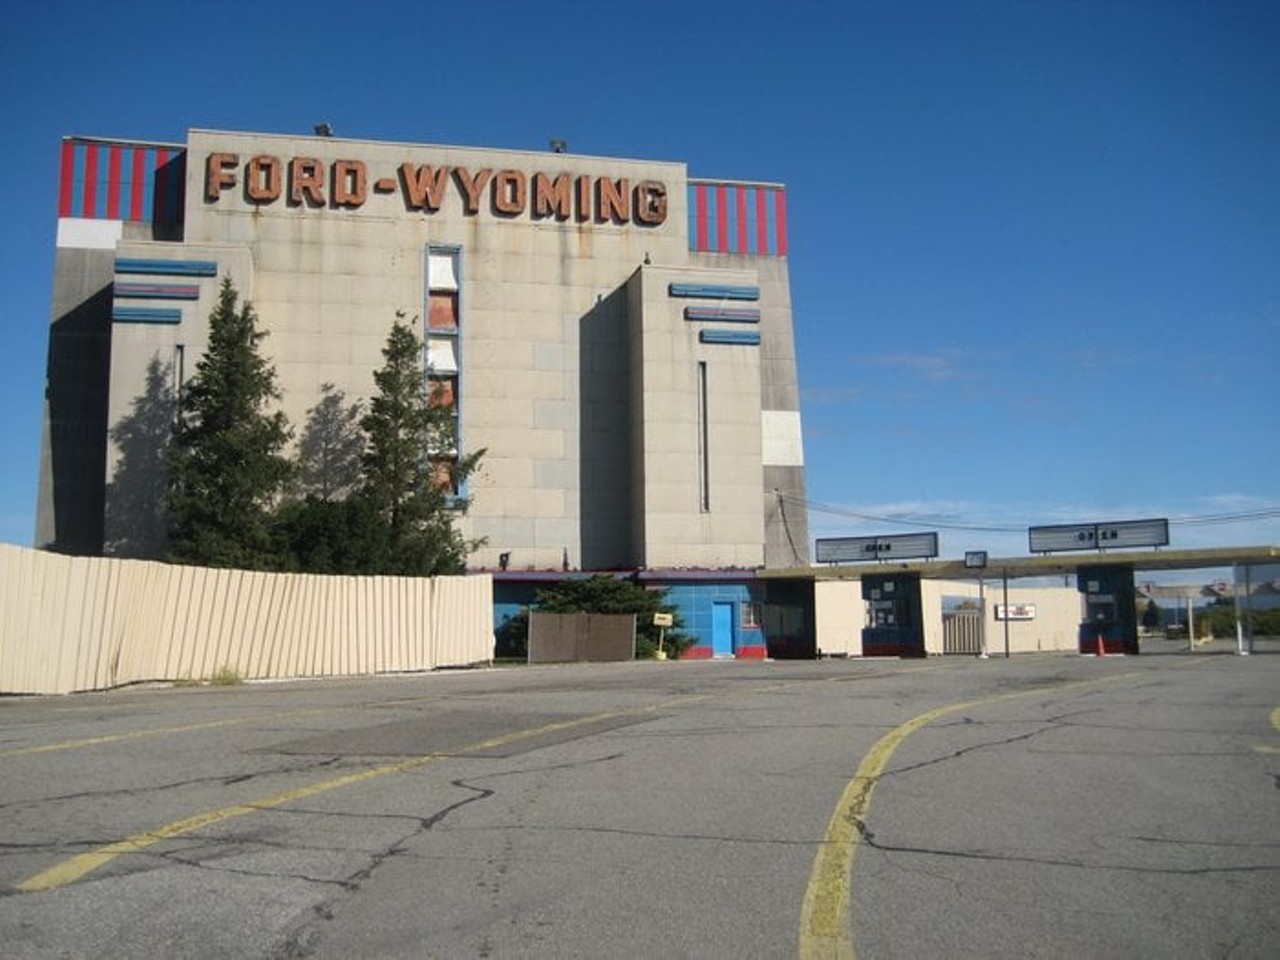 Ford-Wyoming Drive In
10400 Ford Rd., Dearborn; 313-846-6910
Many drive-ins have perished over the years, but the Ford-Wyoming Drive-In still stands tall. Enjoy some popcorn and soda while watching the newest movies right from the comfort of your own car.
Photo via Yelp user, Becki B.